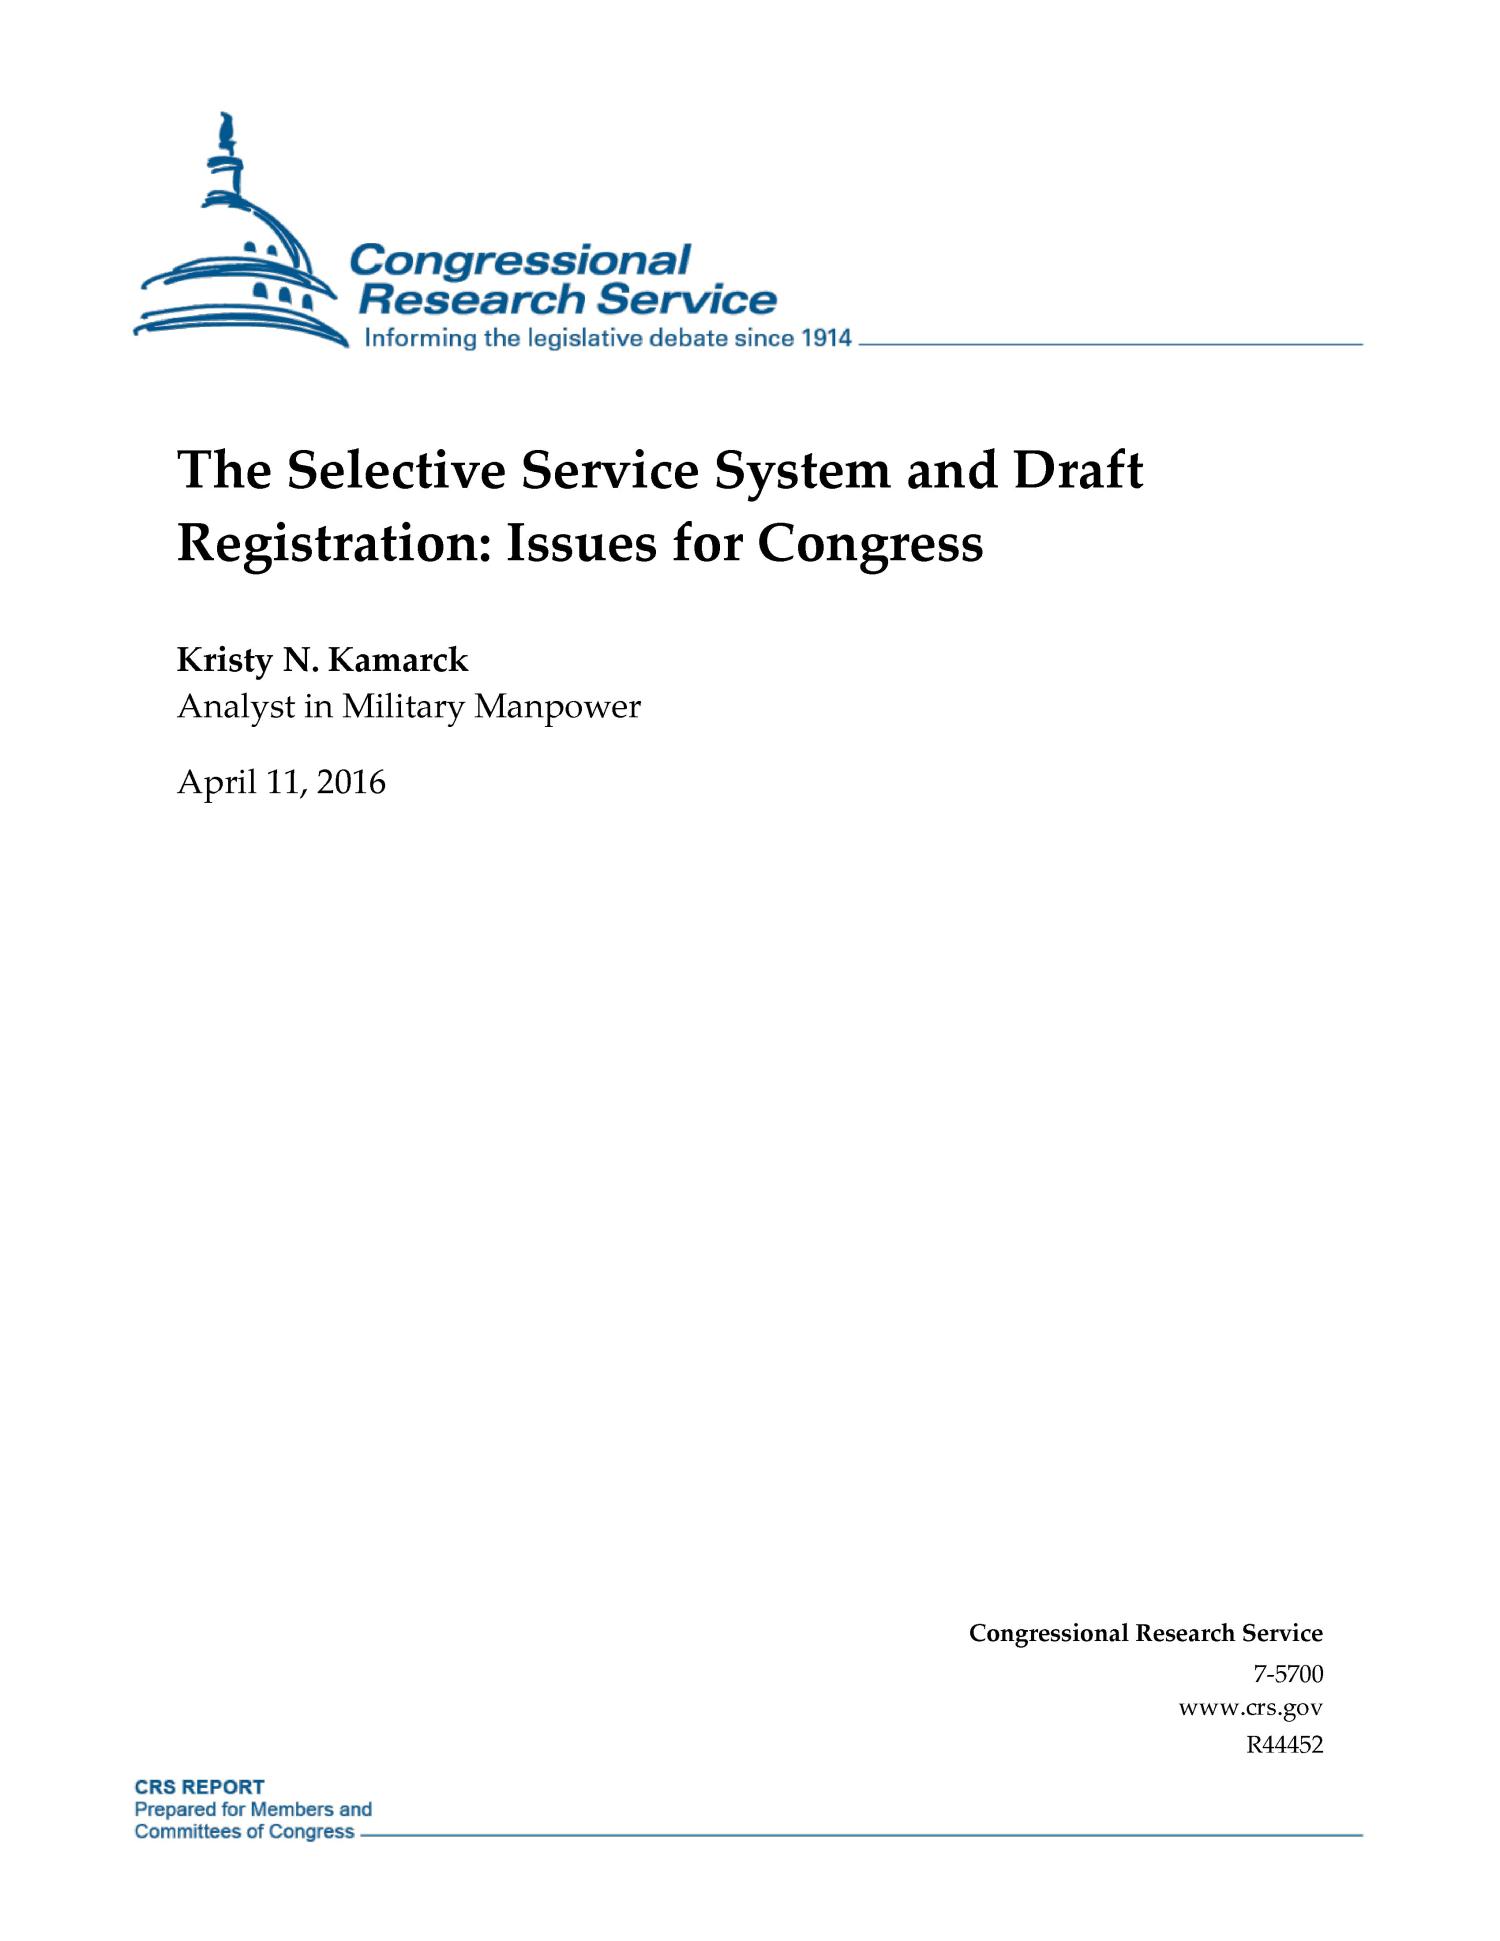 The Selective Service System and Draft Registration Issues for